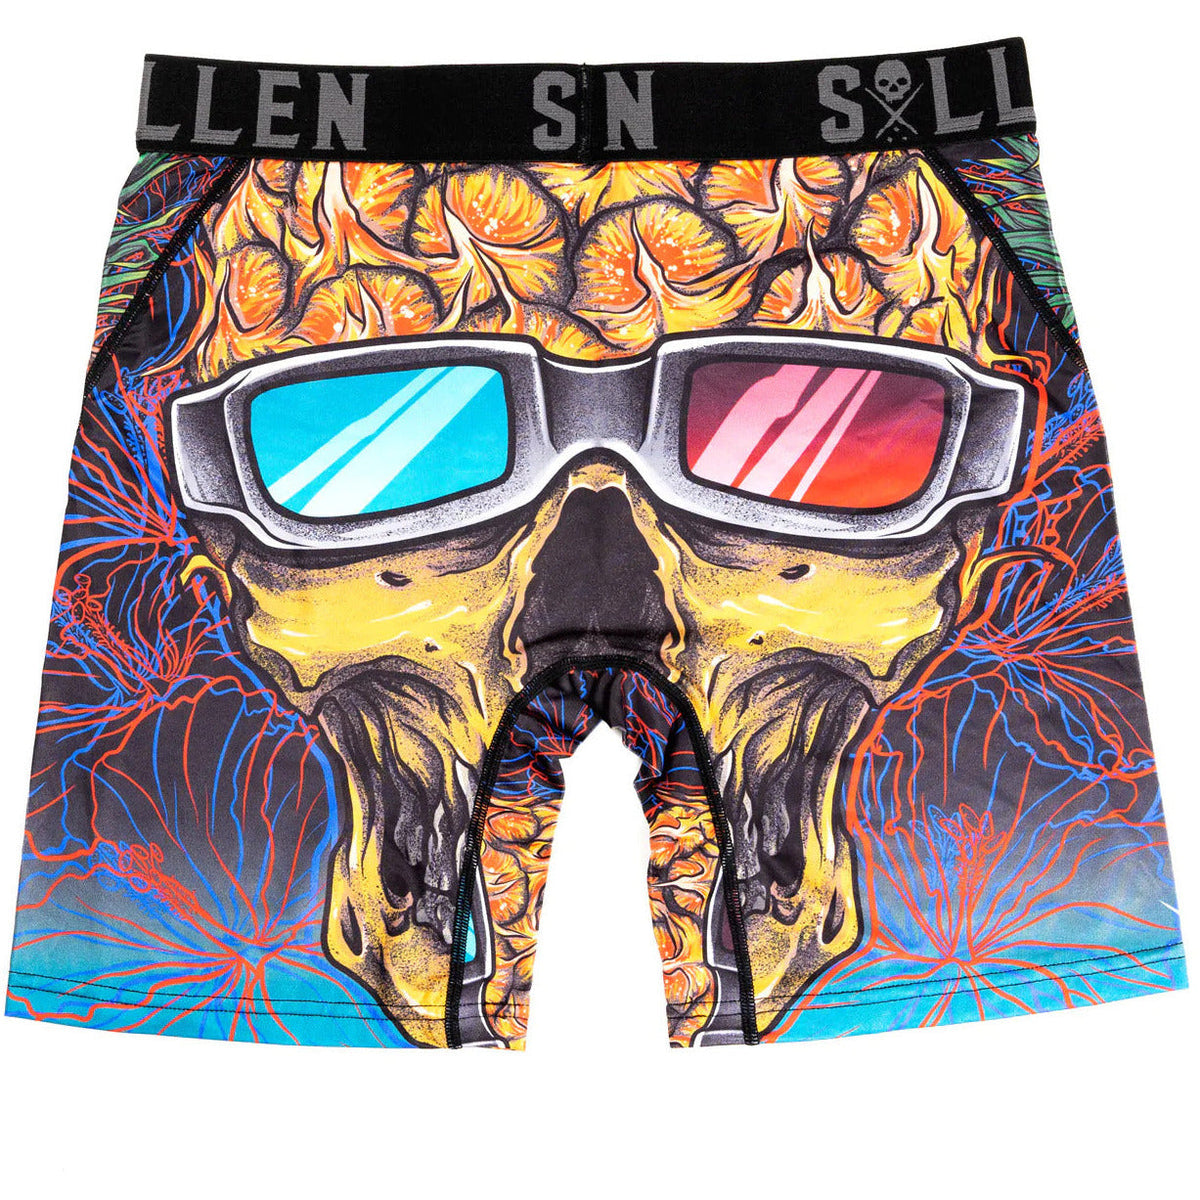 SULLEN-ART-COLLECTIVE-PINESKULL-BOXERS - BOXER - Synik Clothing - synikclothing.com